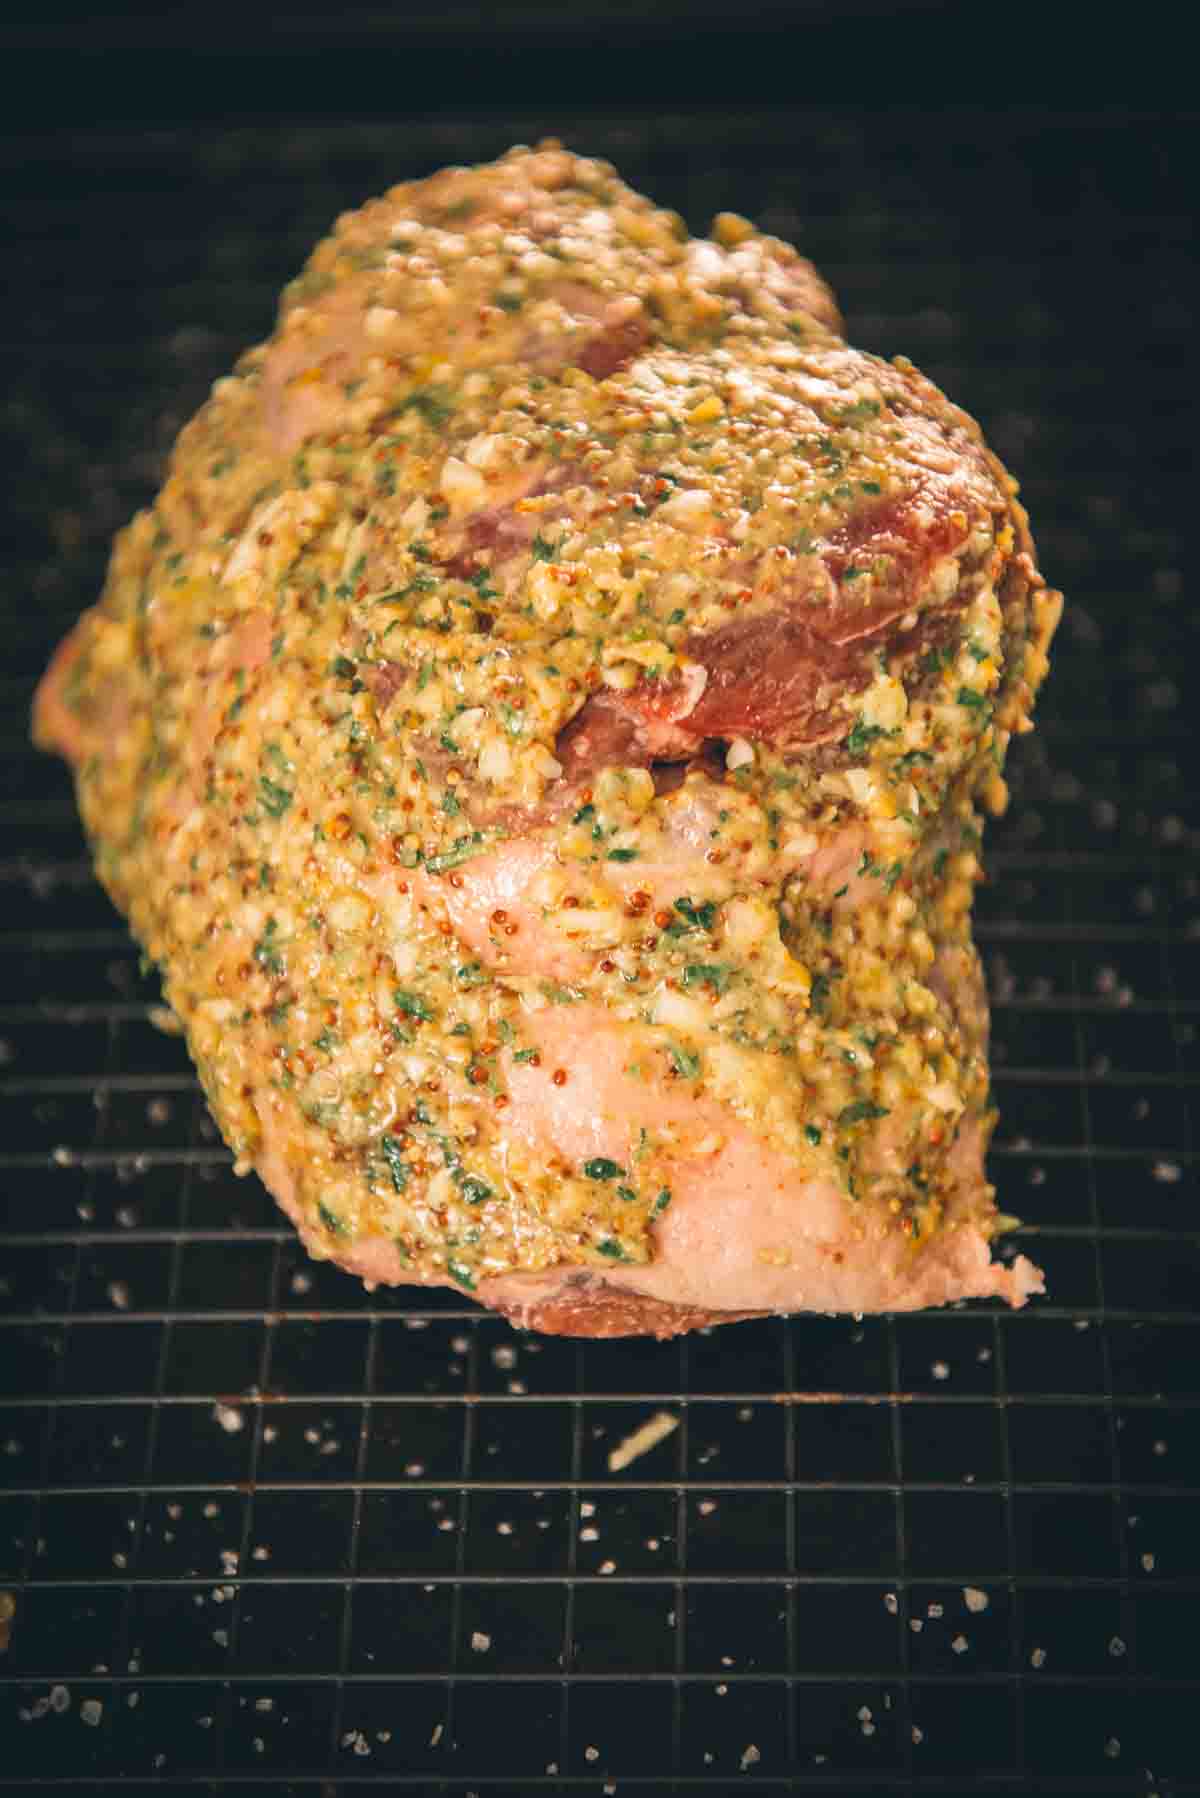 Showing close up of mustard herb mix on lamb.